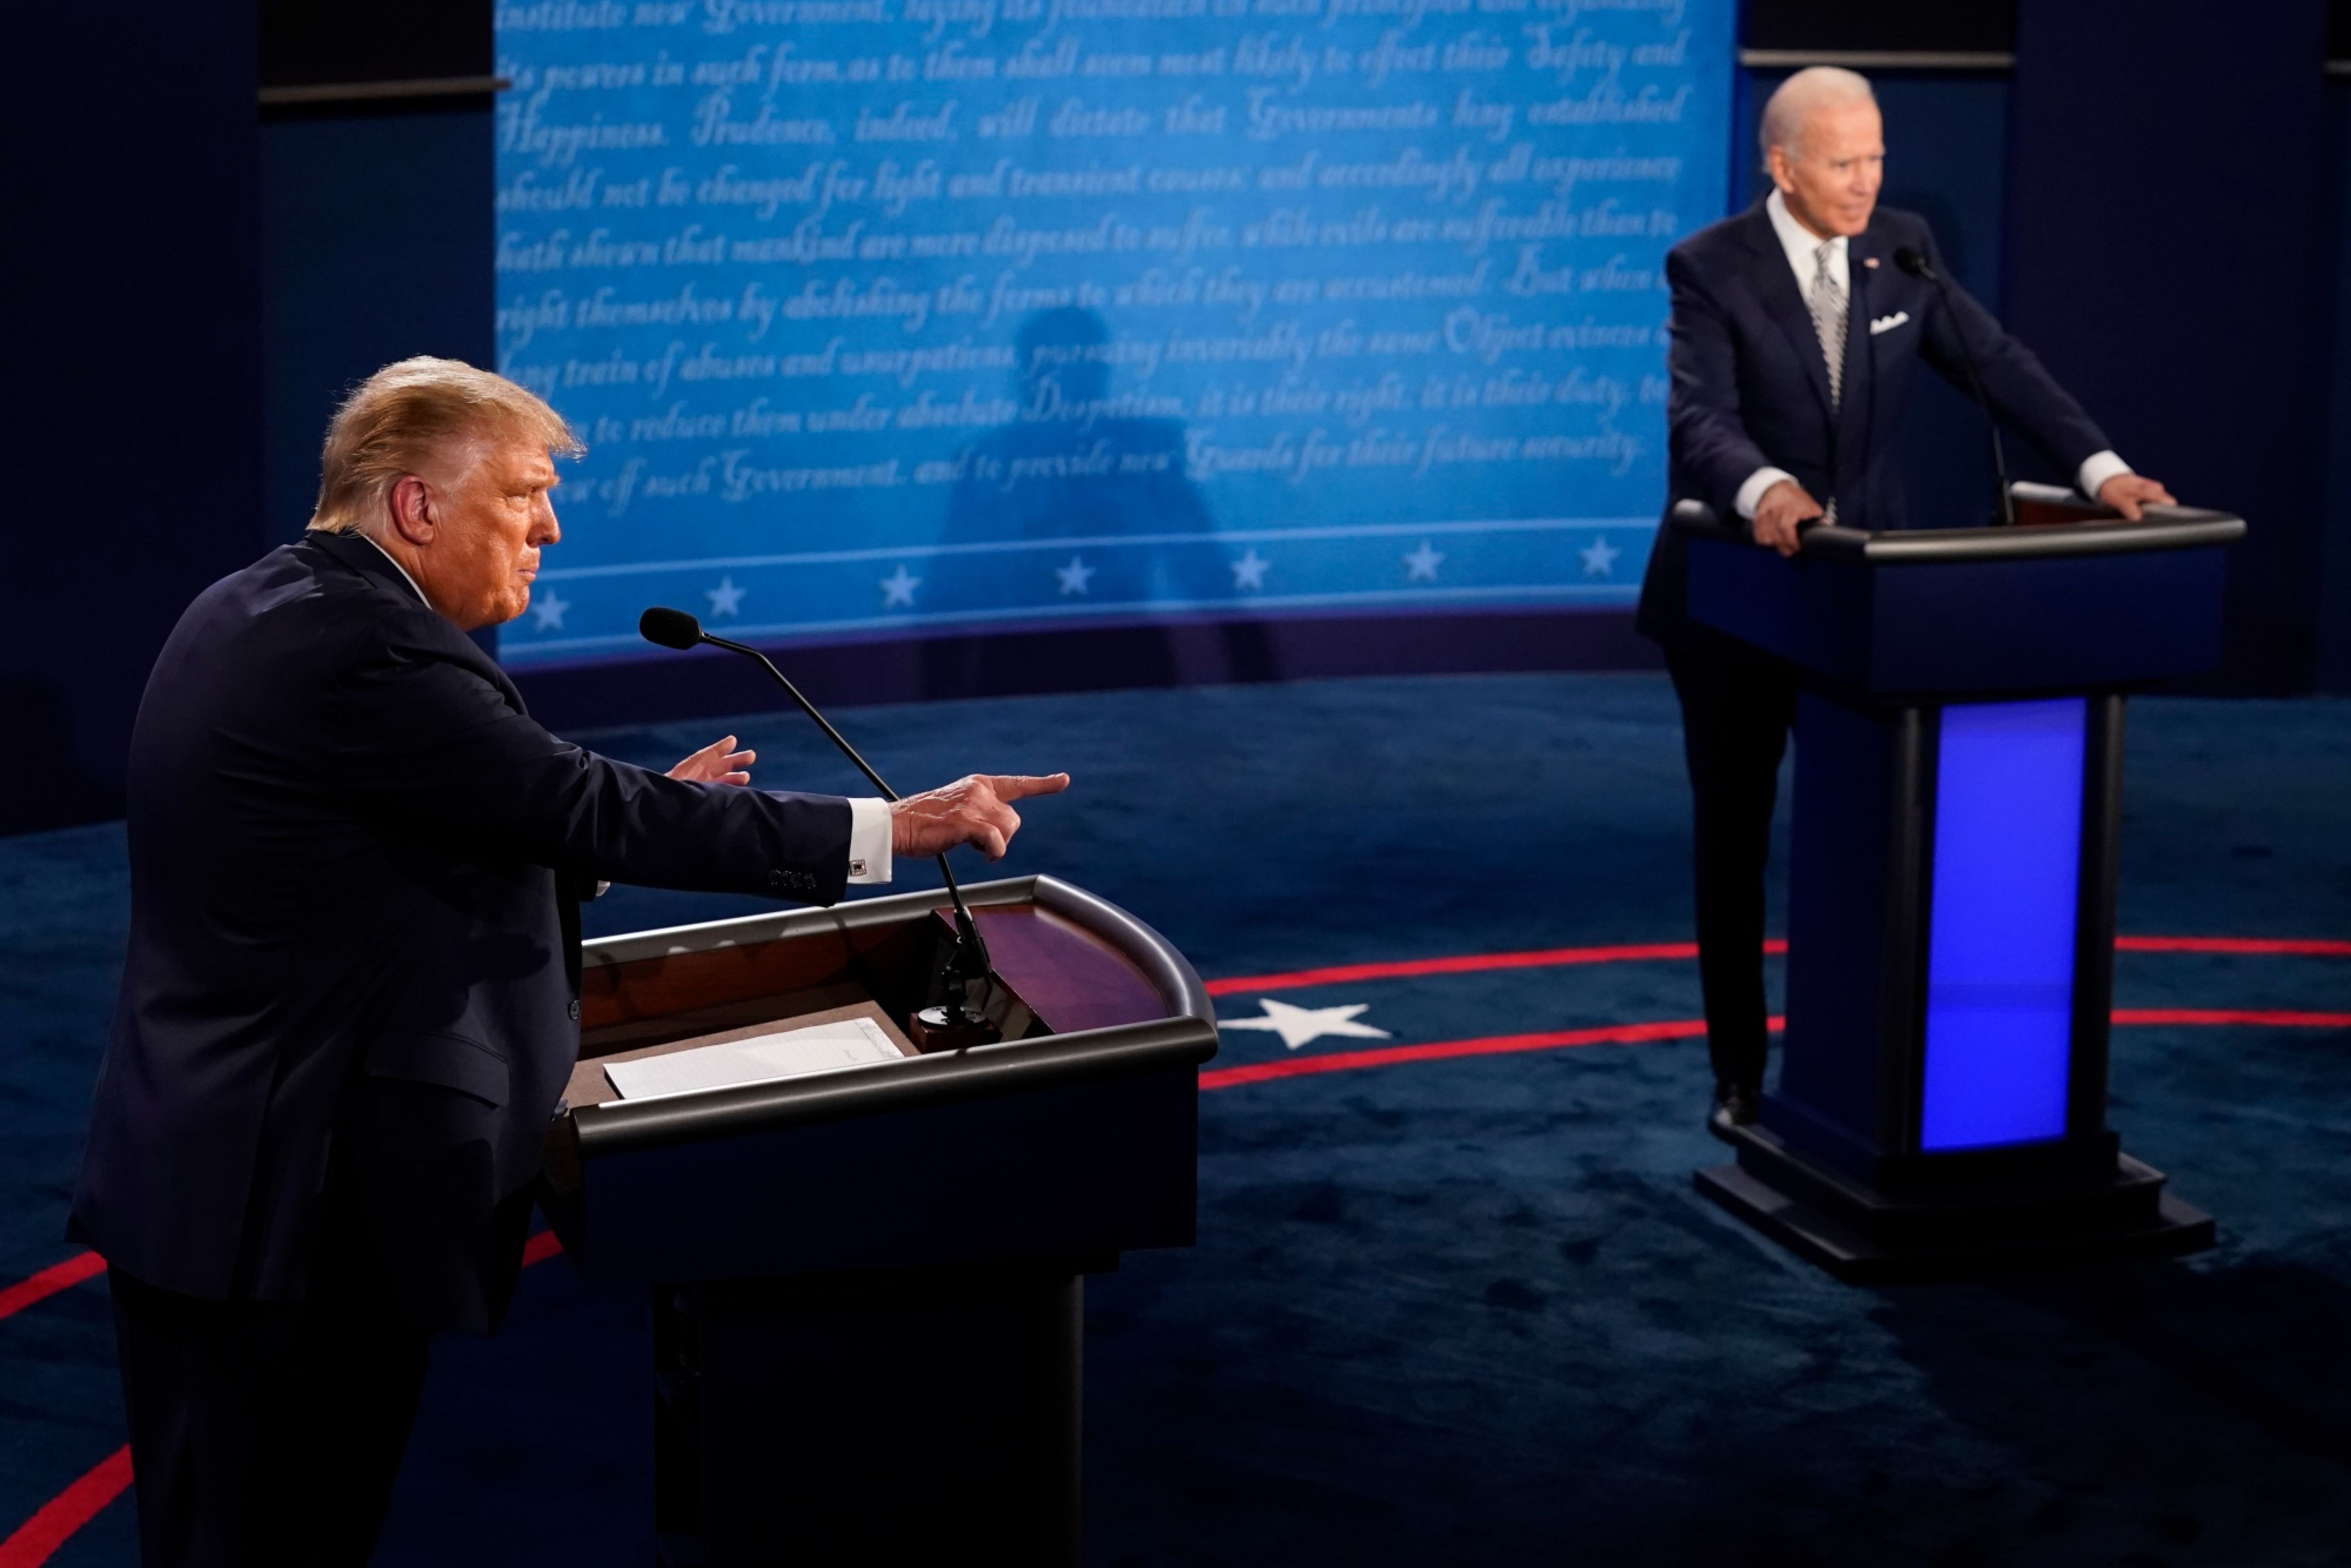 Trump Gives Facts Short Shrift In Acrimonious Debate With Biden